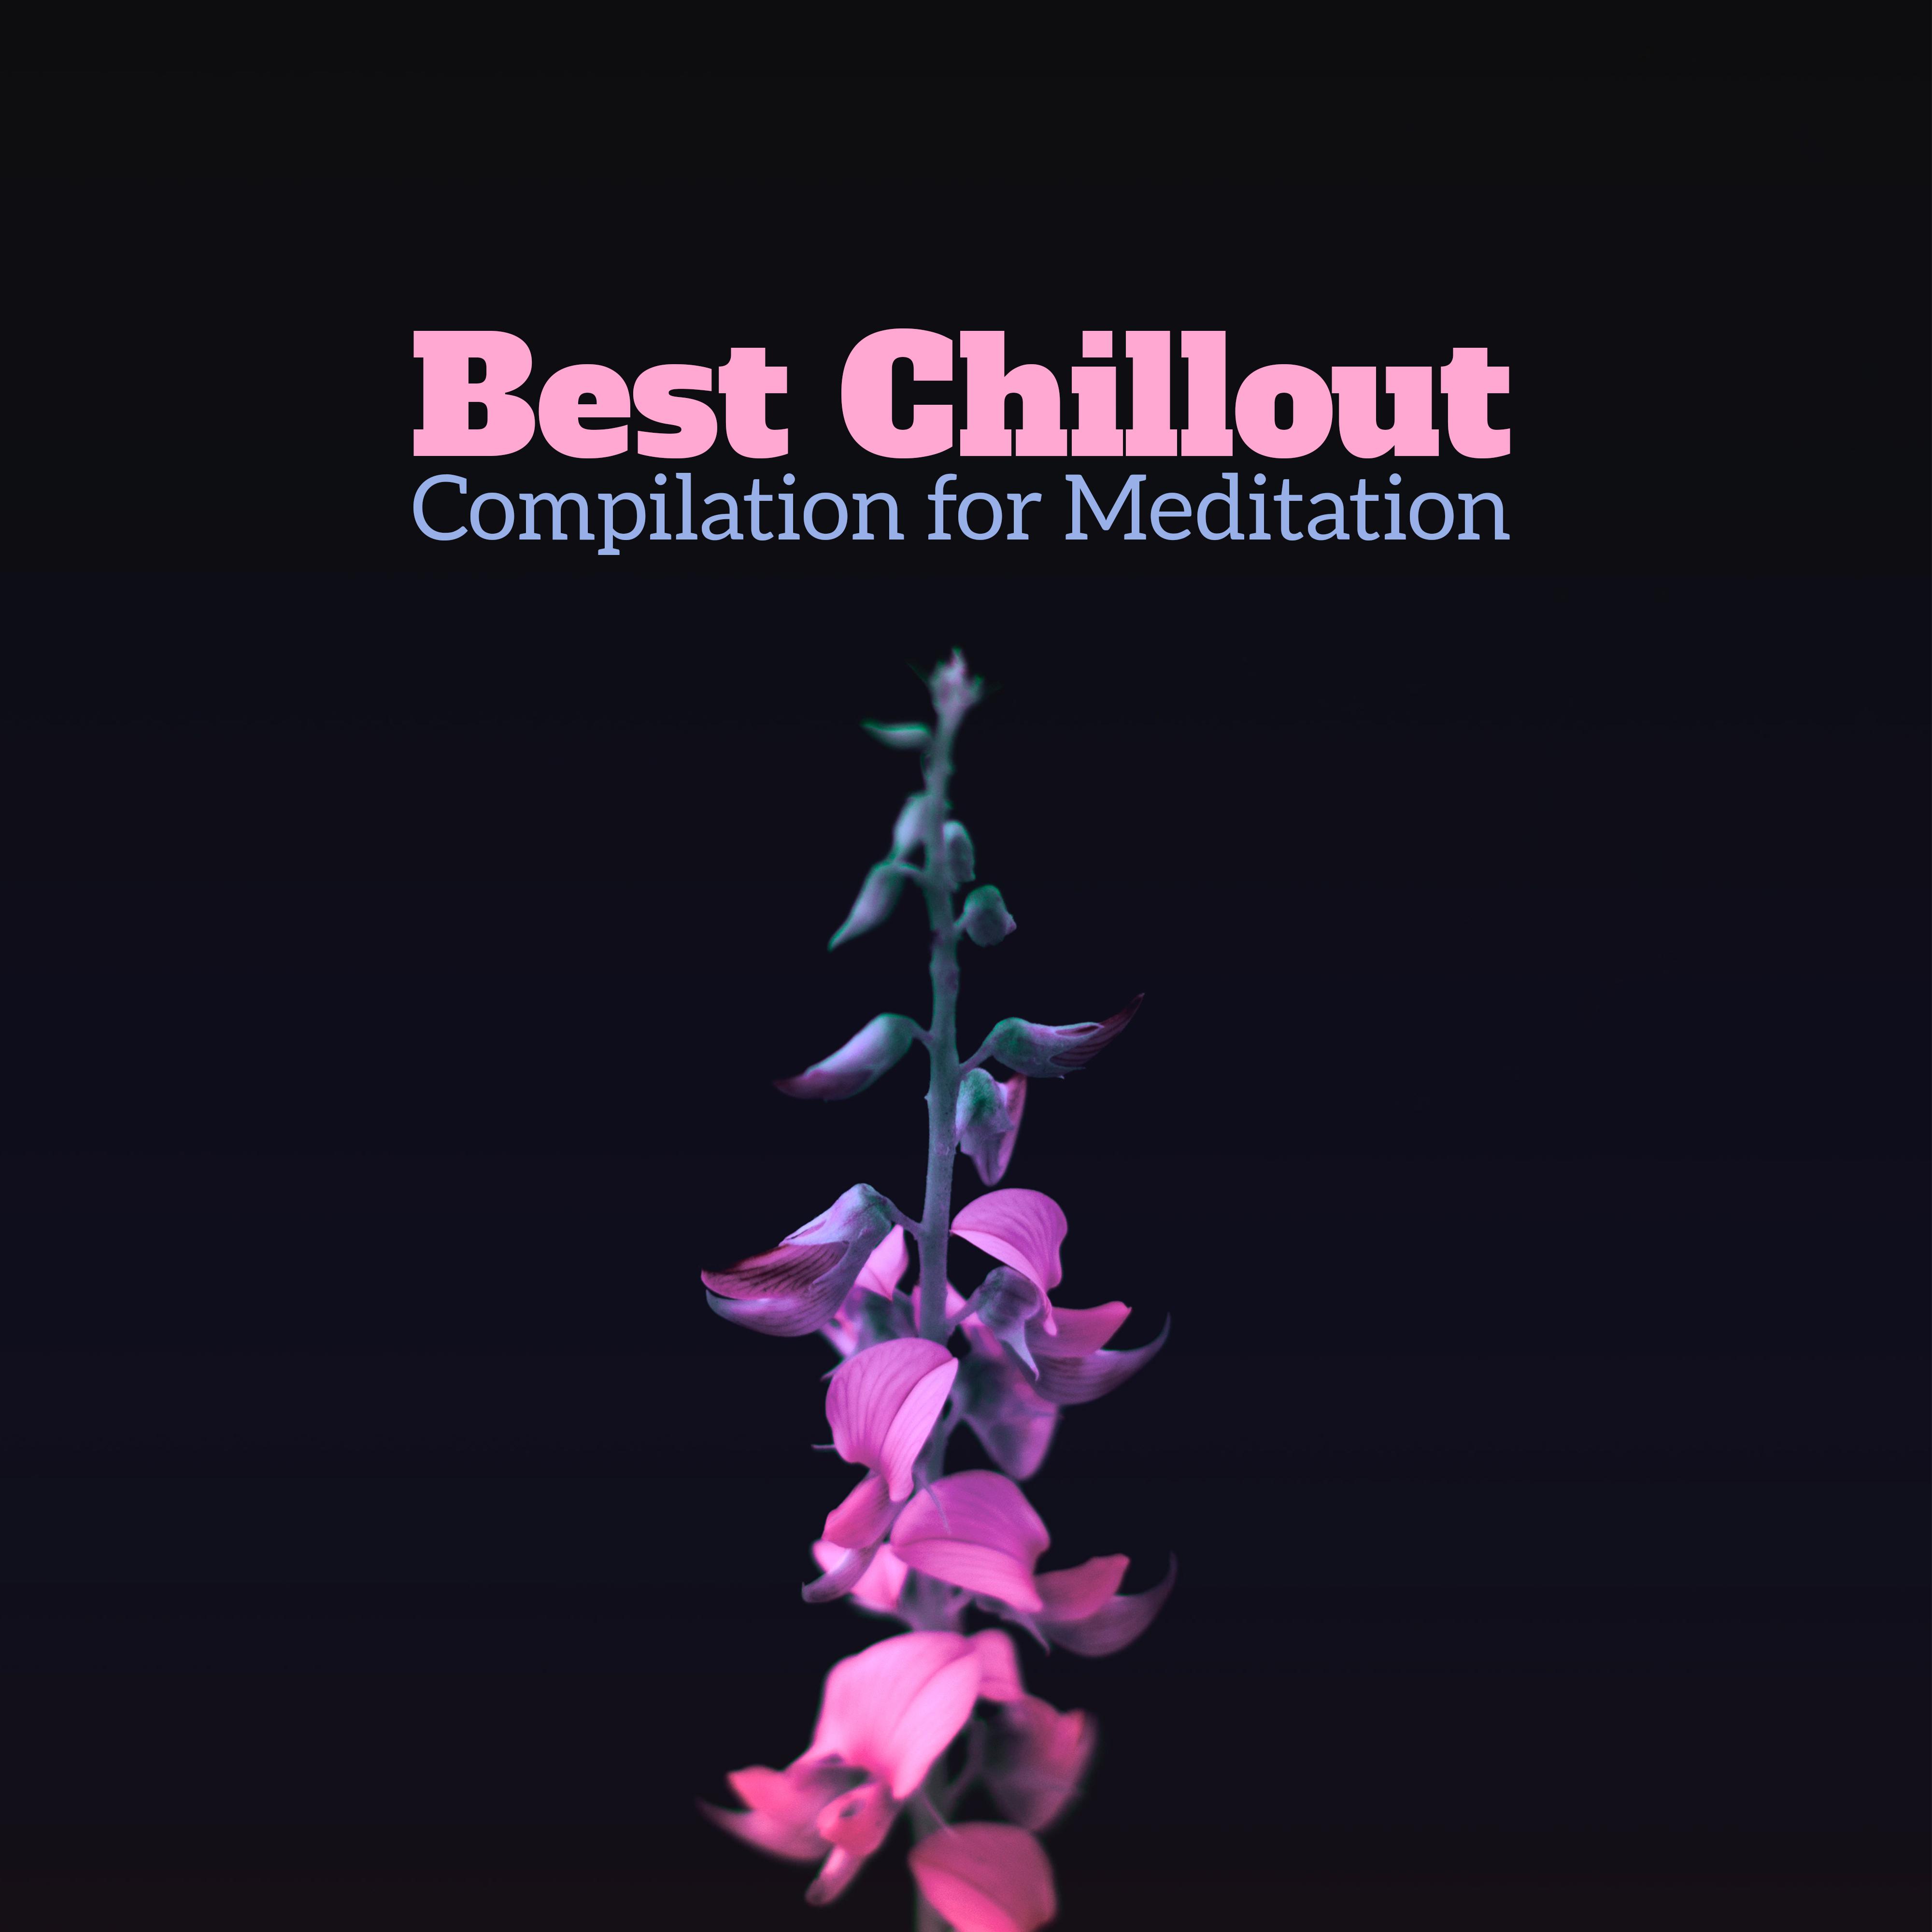 Best Chillout Compilation for Meditation